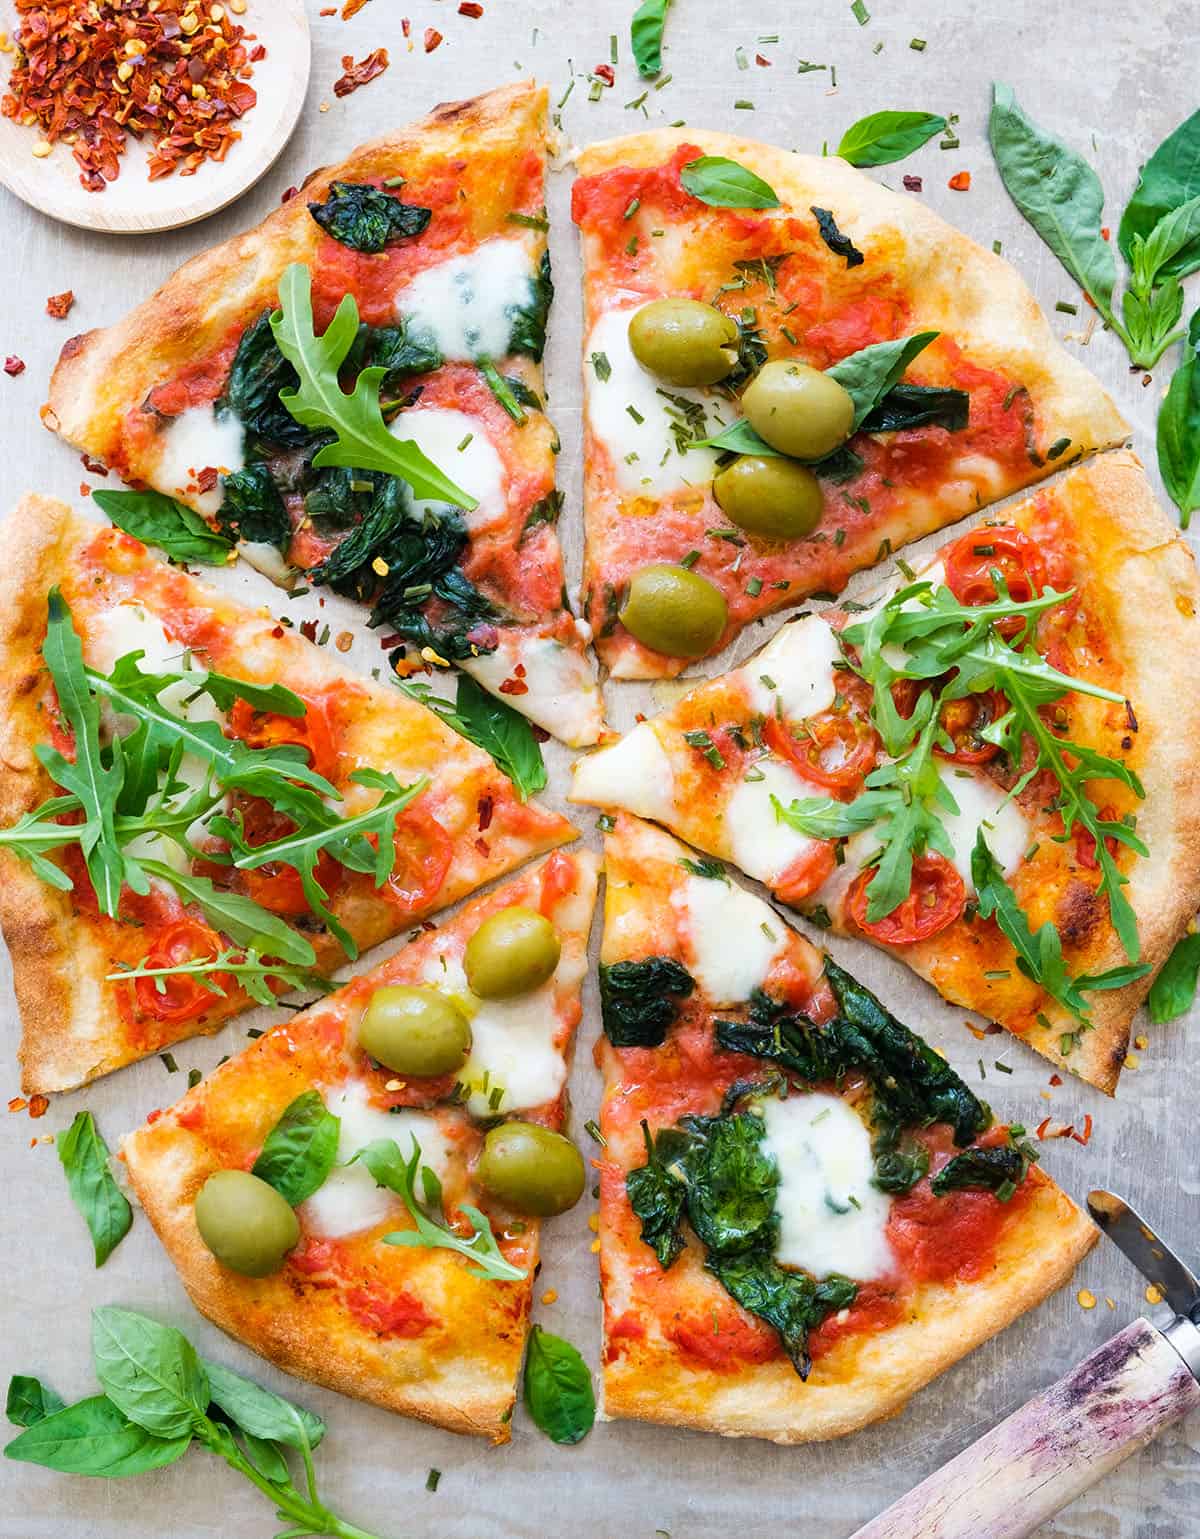 Top view of a large round pizza cut into slices with different pizza toppings like olives, rocket, and  spinach.